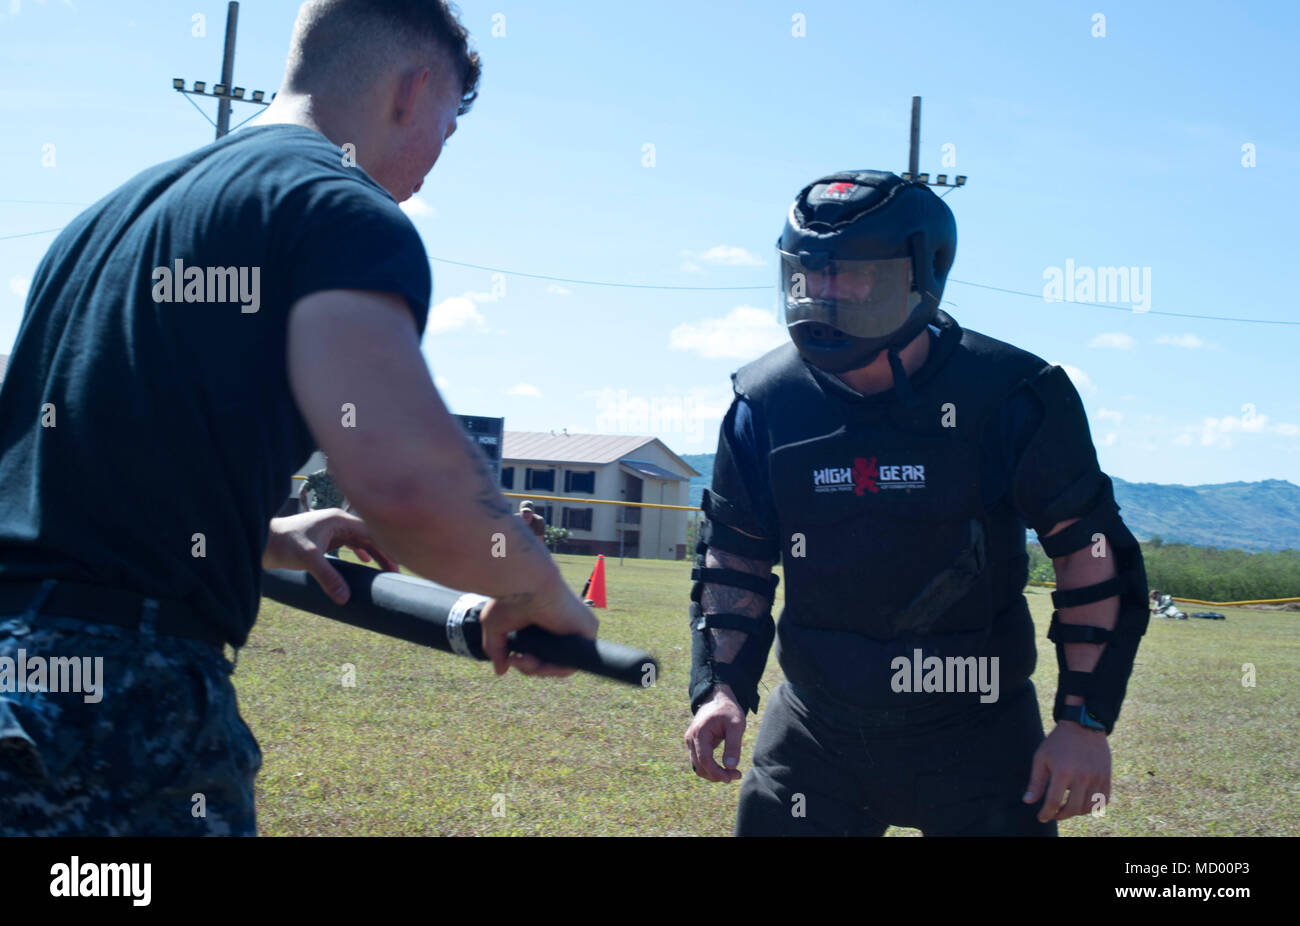 SANTA RITA, Guam ( March 9, 2018) Gunner's Mate Seaman Michael White approaches Red Man, Gunner's Mate Seaman Blake Day, both assigned to the submarine tender USS Frank Cable (AS 40), as he fights through stations during non-lethal weapons training, while under the effects of Oleoresin Capsicum, pepper spray, on Naval Base Guam, March 9. Frank Cable, forward-deployed to Guam, repairs, rearms and reprovisions deployed U.S. Naval Forces in the Indo-Pacific region.   (U.S. Navy photo by Mass Communication Specialist 3rd Class Alana Langdon/Released) Stock Photo